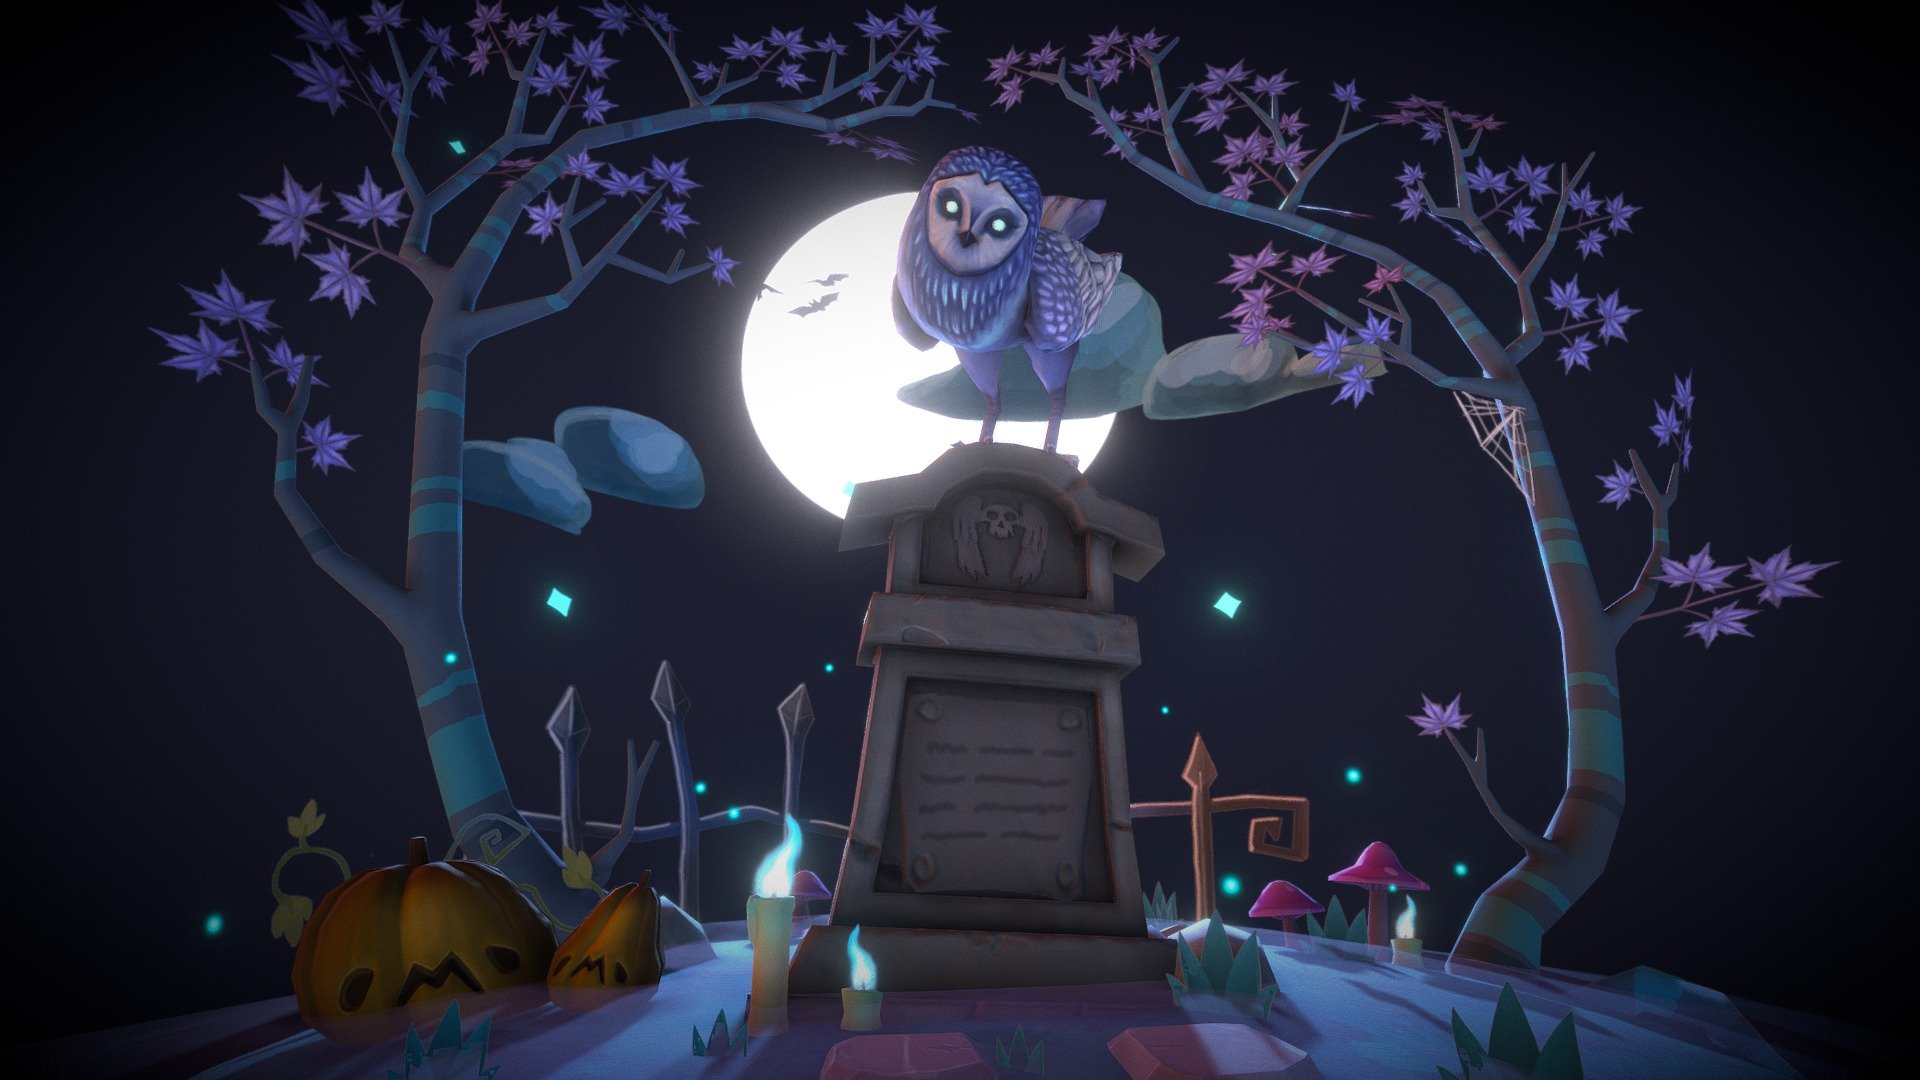 I made this model inspired in Halloween! Hope you like it! 

Software Used: Zbrush, 3DMax, Substance Painter, Photoshop, 3D Coat - Graveyard Owl Diorama [Animated] - 3D model by Meri L. (@azurehusky) 3d model